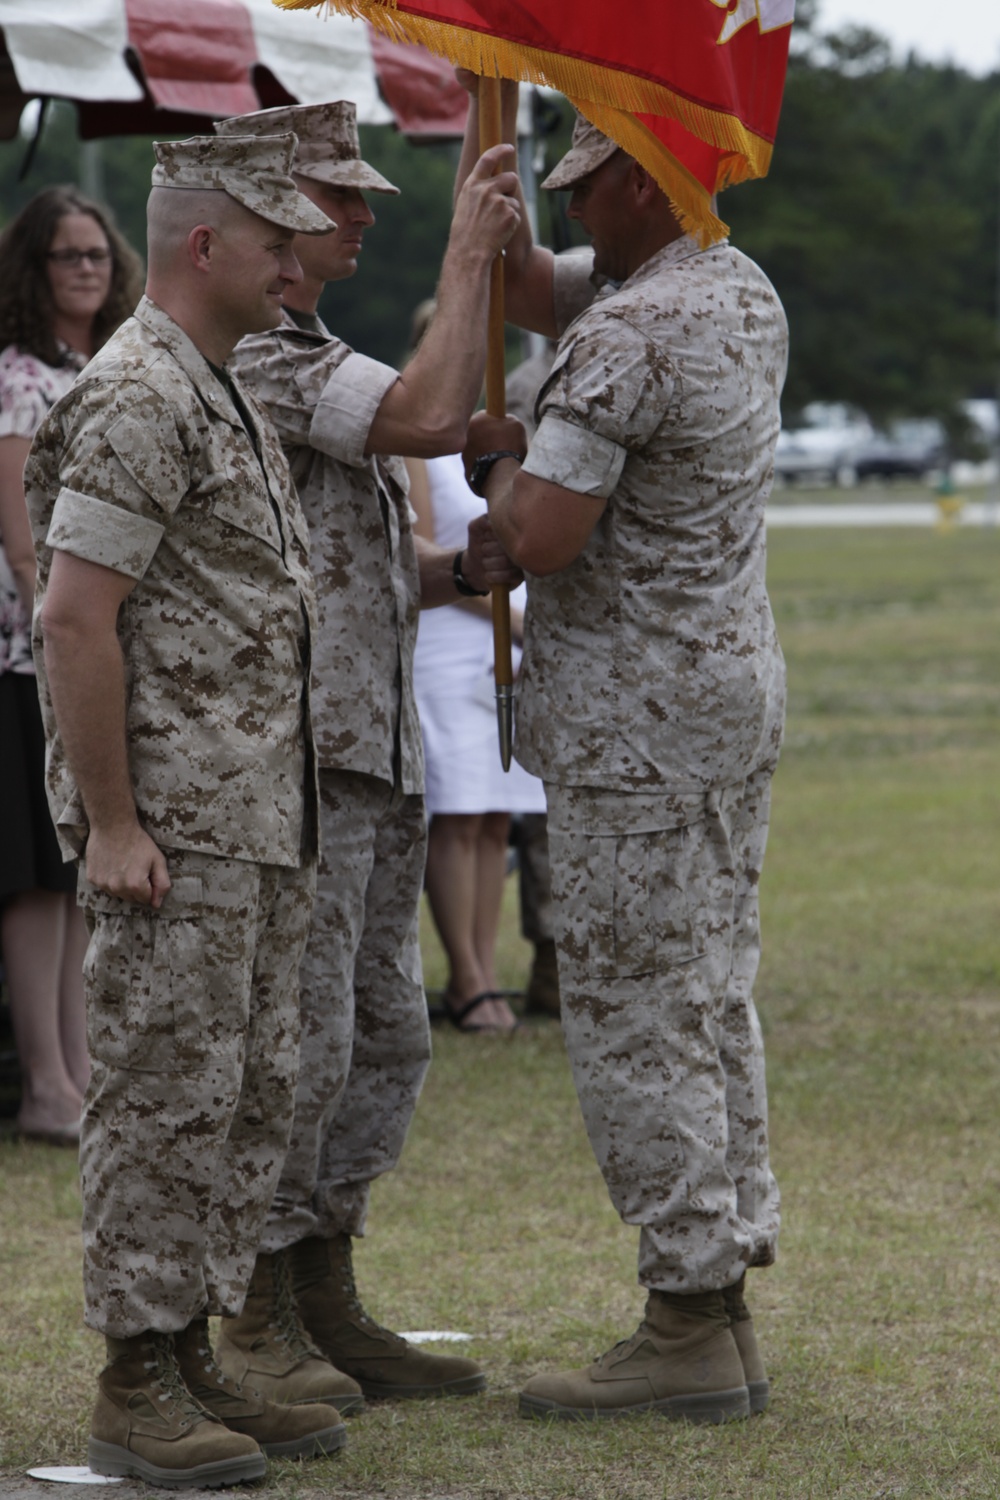 Richie relinquishes command of MACS-2 to Grossnickle